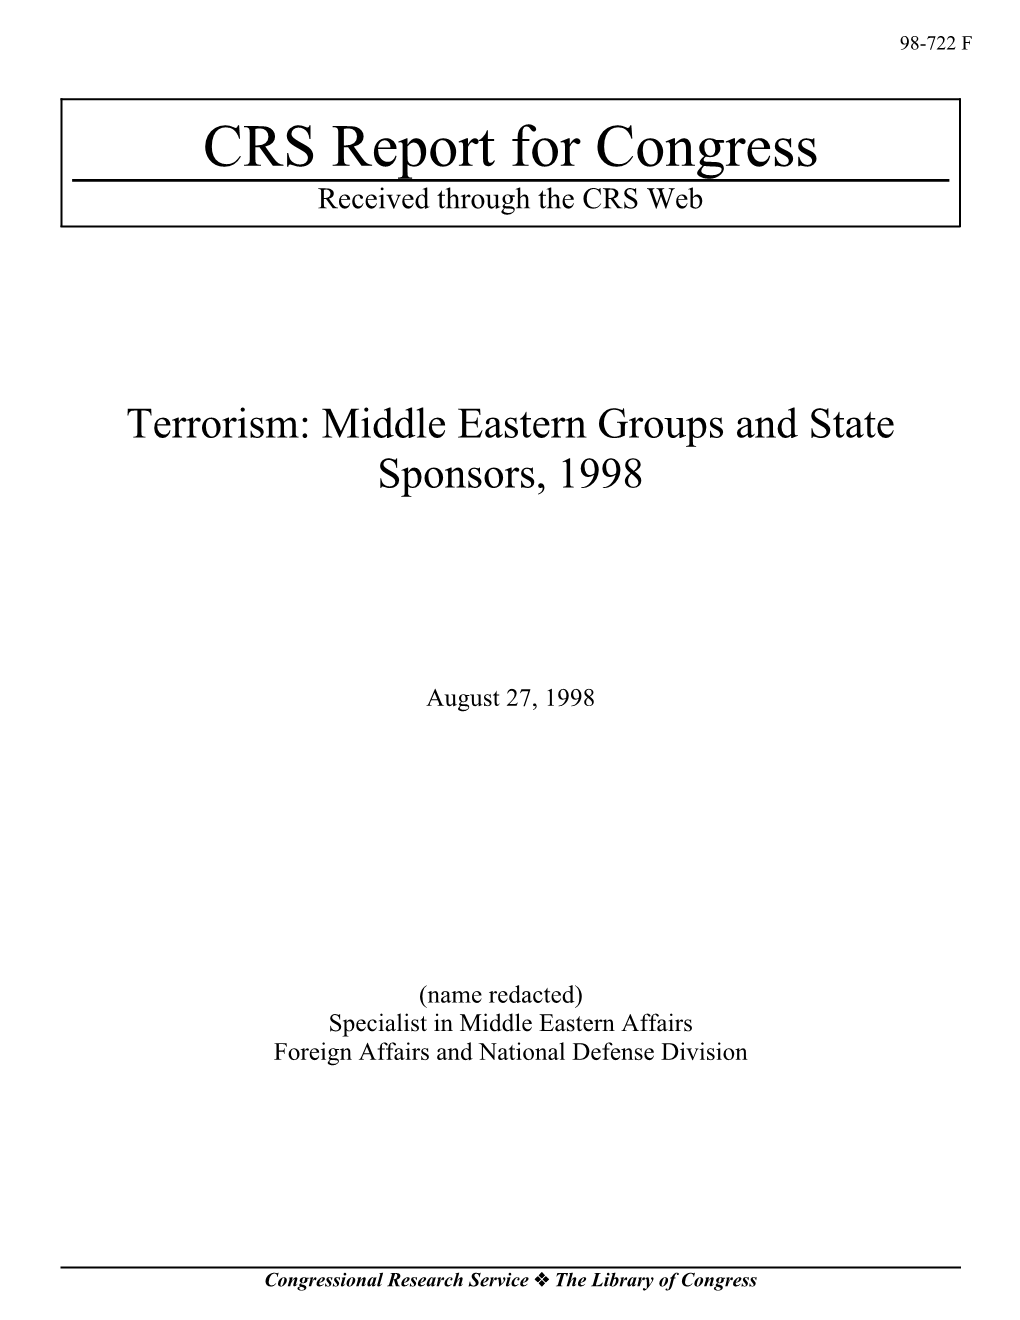 Terrorism: Middle Eastern Groups and State Sponsors, 1998